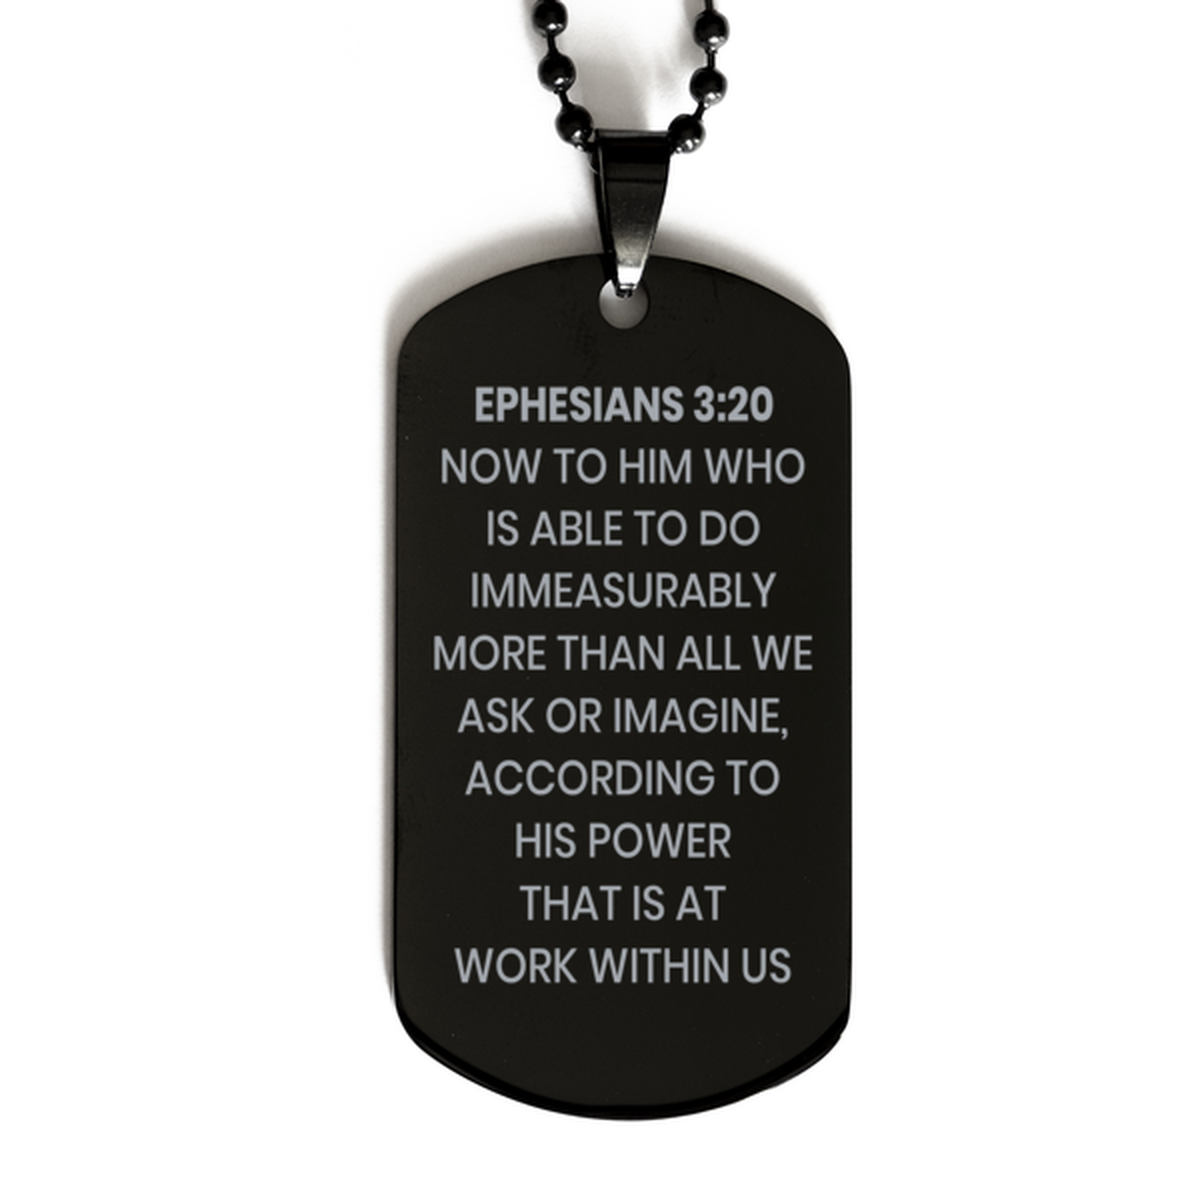 Ephesians 3:20 Necklace, Bible Verse Necklace, Christian Necklace, Christian Birthday Gift, Black Dog Tag Necklace, Gift for Christian.